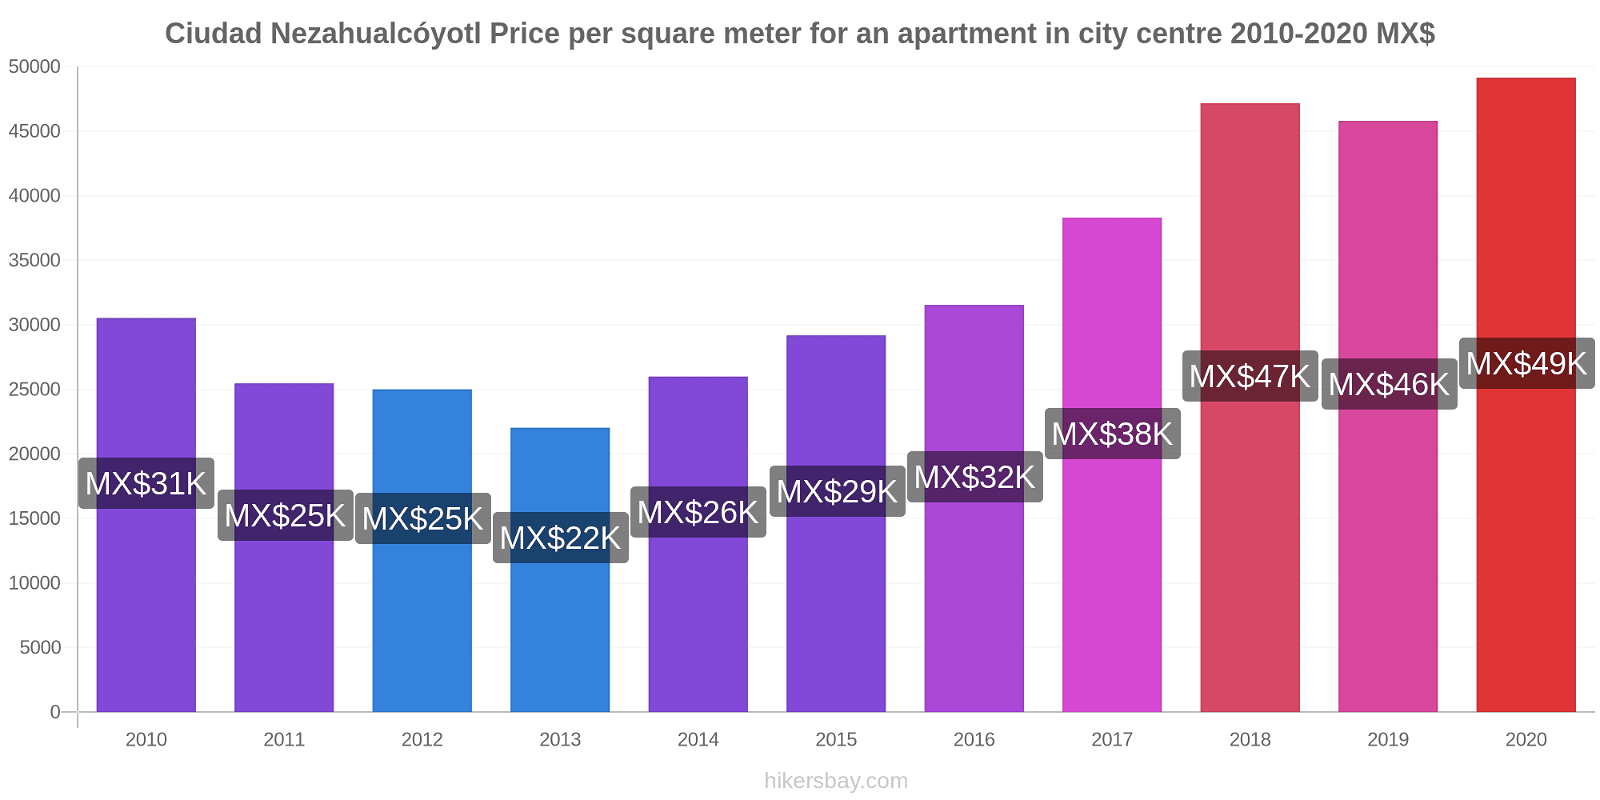 Ciudad Nezahualcóyotl price changes Price per square meter for an apartment in city centre hikersbay.com